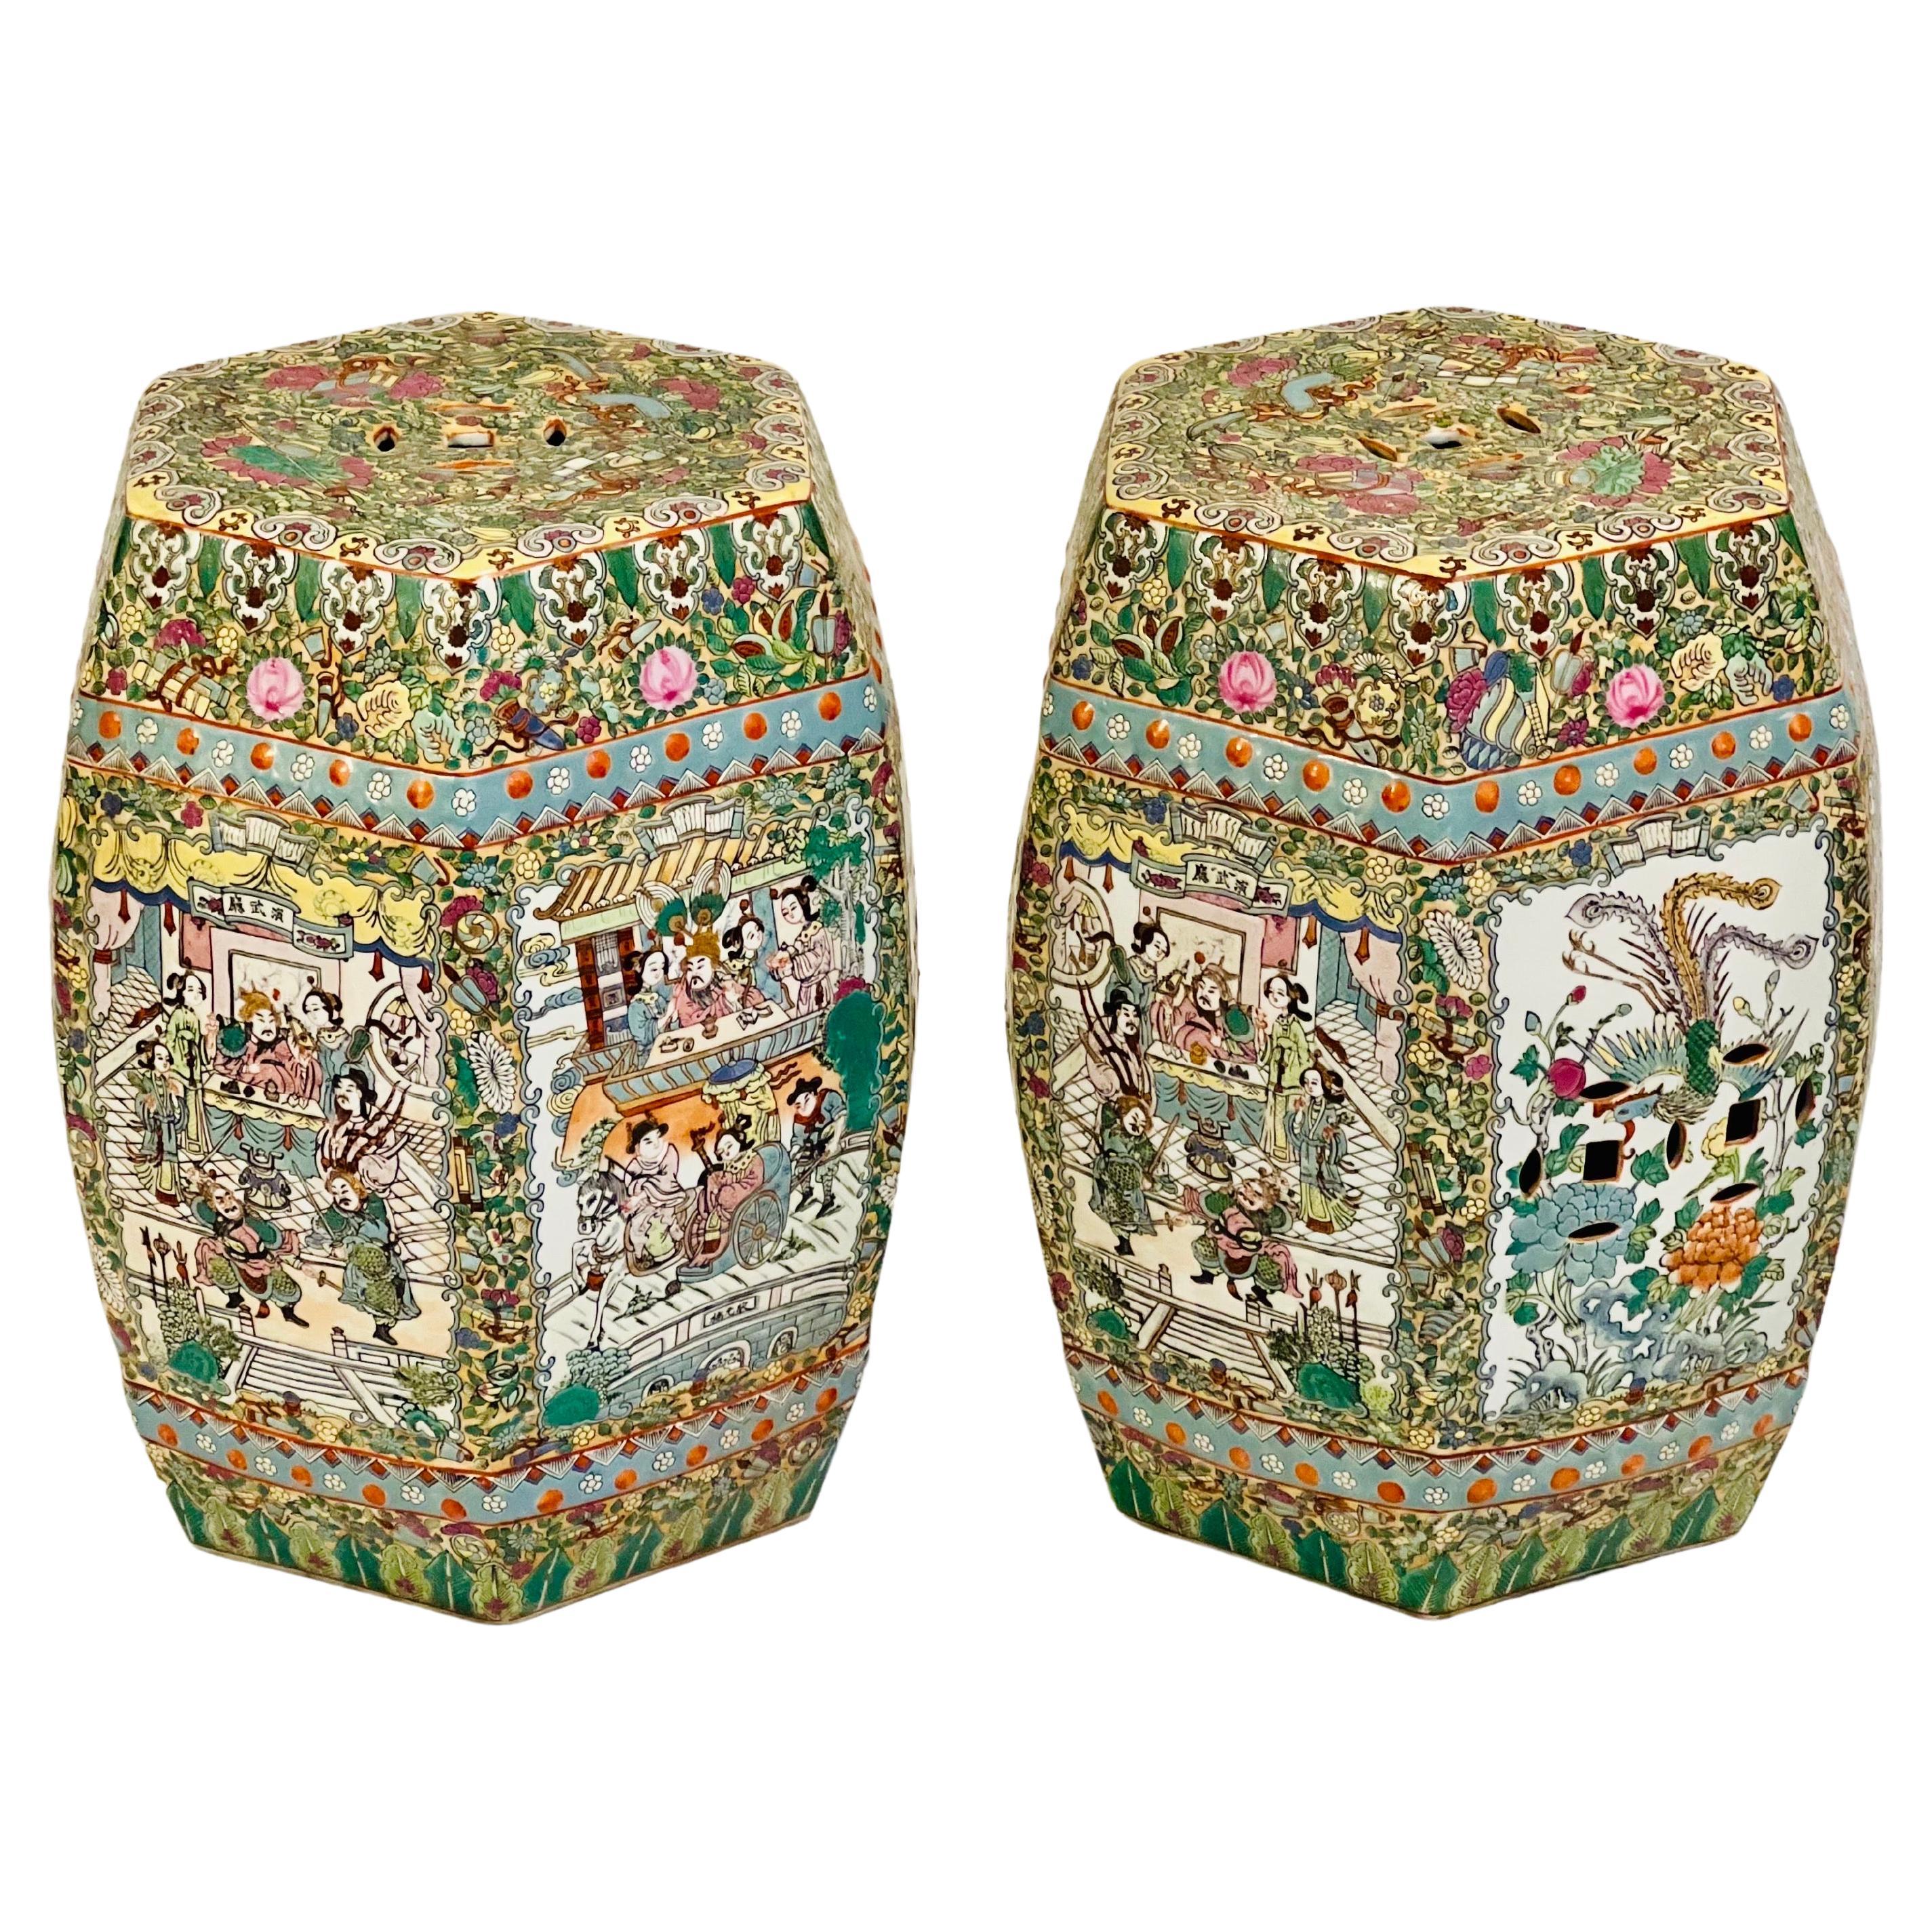 Vintage Hand Painted Porcelain Chinese Garden Stools, Pair